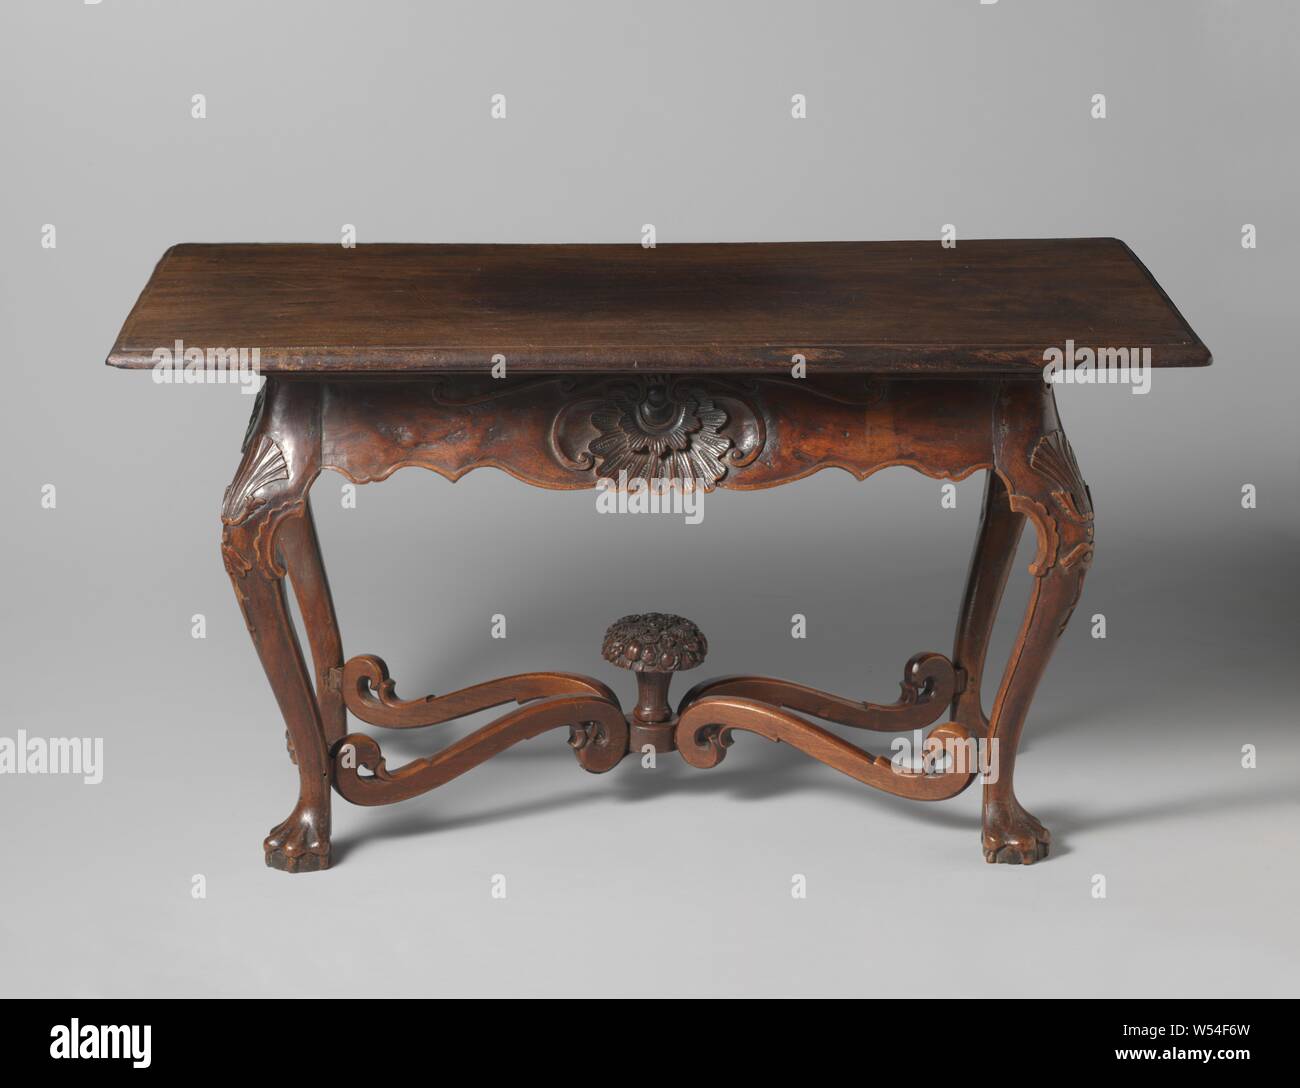 Table made of Indonesian wood, resting on S-shaped legs placed at an angle, ending in convex claws and adorned with a carved shell pattern above the swelling. The legs are connected by an X-shaped cross, formed by S-shaped rungs with a flower basket at the intersection. The lines are scalloped on the bottom and have carved shell motifs, flanked by volutes, as center pieces. The far-reaching leaf is of a different type of wood, probably not originally., anonymous, Indonesia, c. 1720 - c. 1740, wood (plant material), teak (wood), h 81 cm × w 153 cm × d 89 cm × w 64 kg Stock Photo